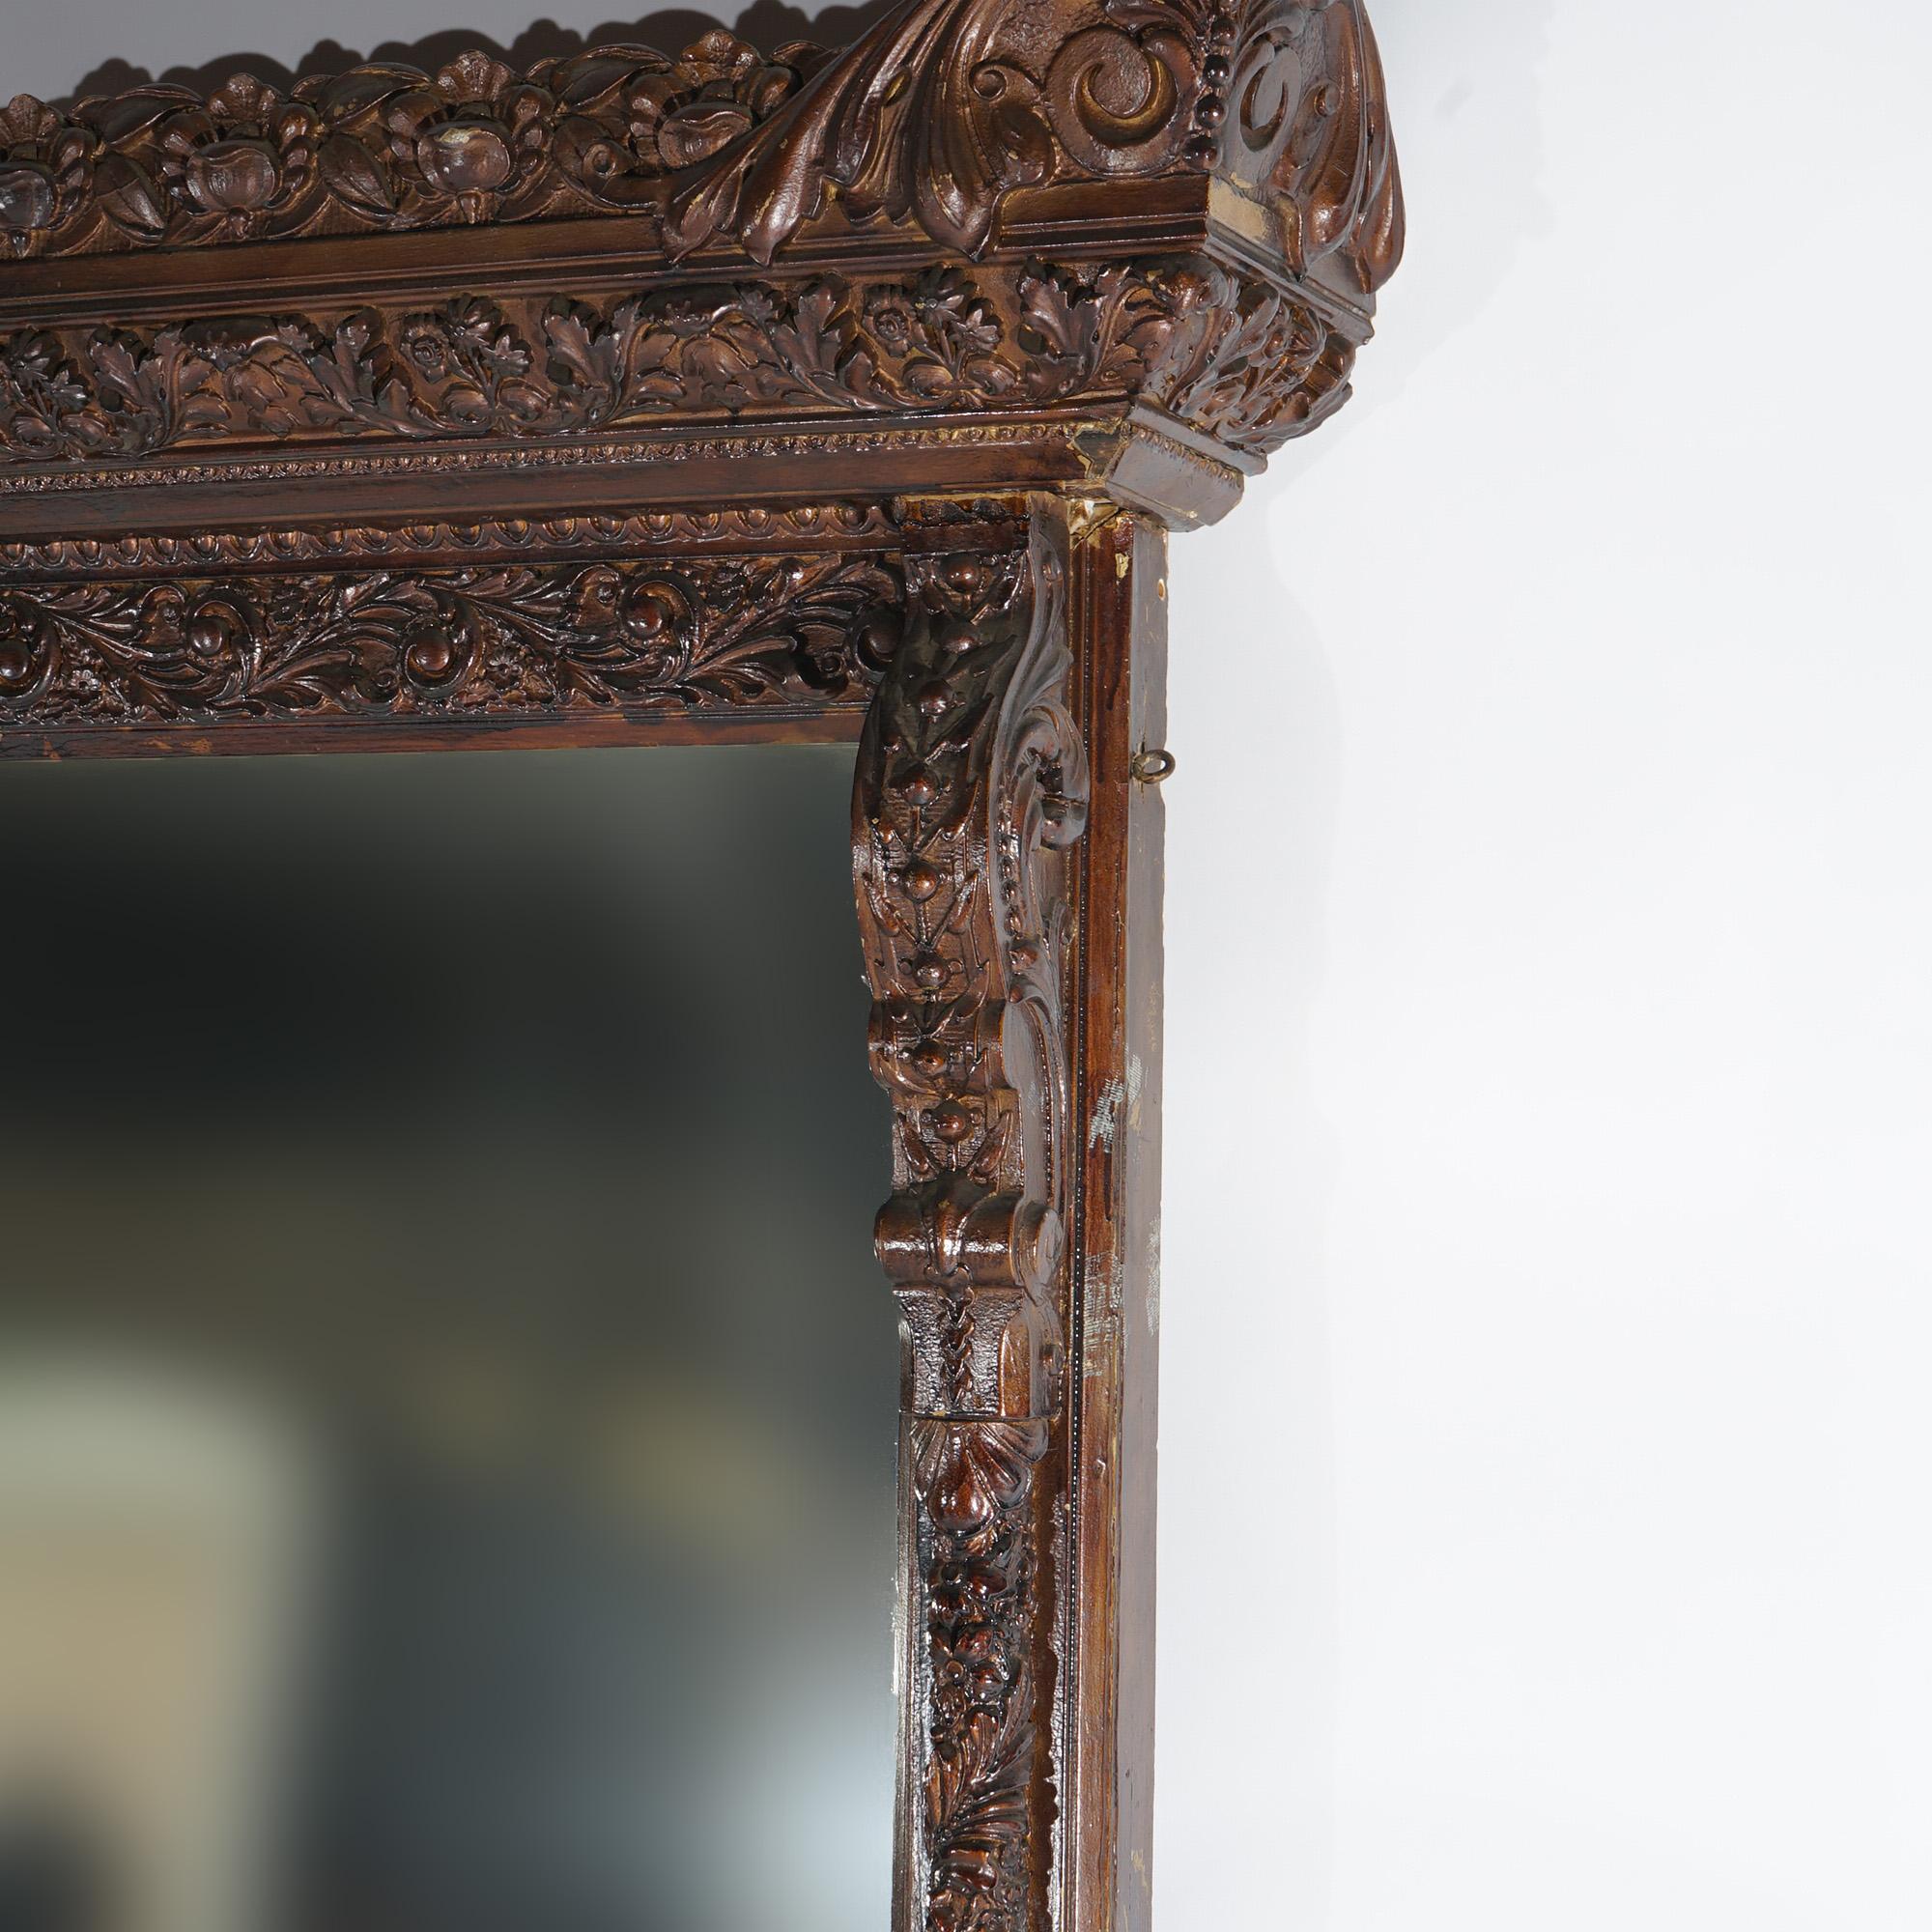 Antique Renaissance Revival Heavily Carved Wood & Gesso Over Mantle Mirror 19thC For Sale 5